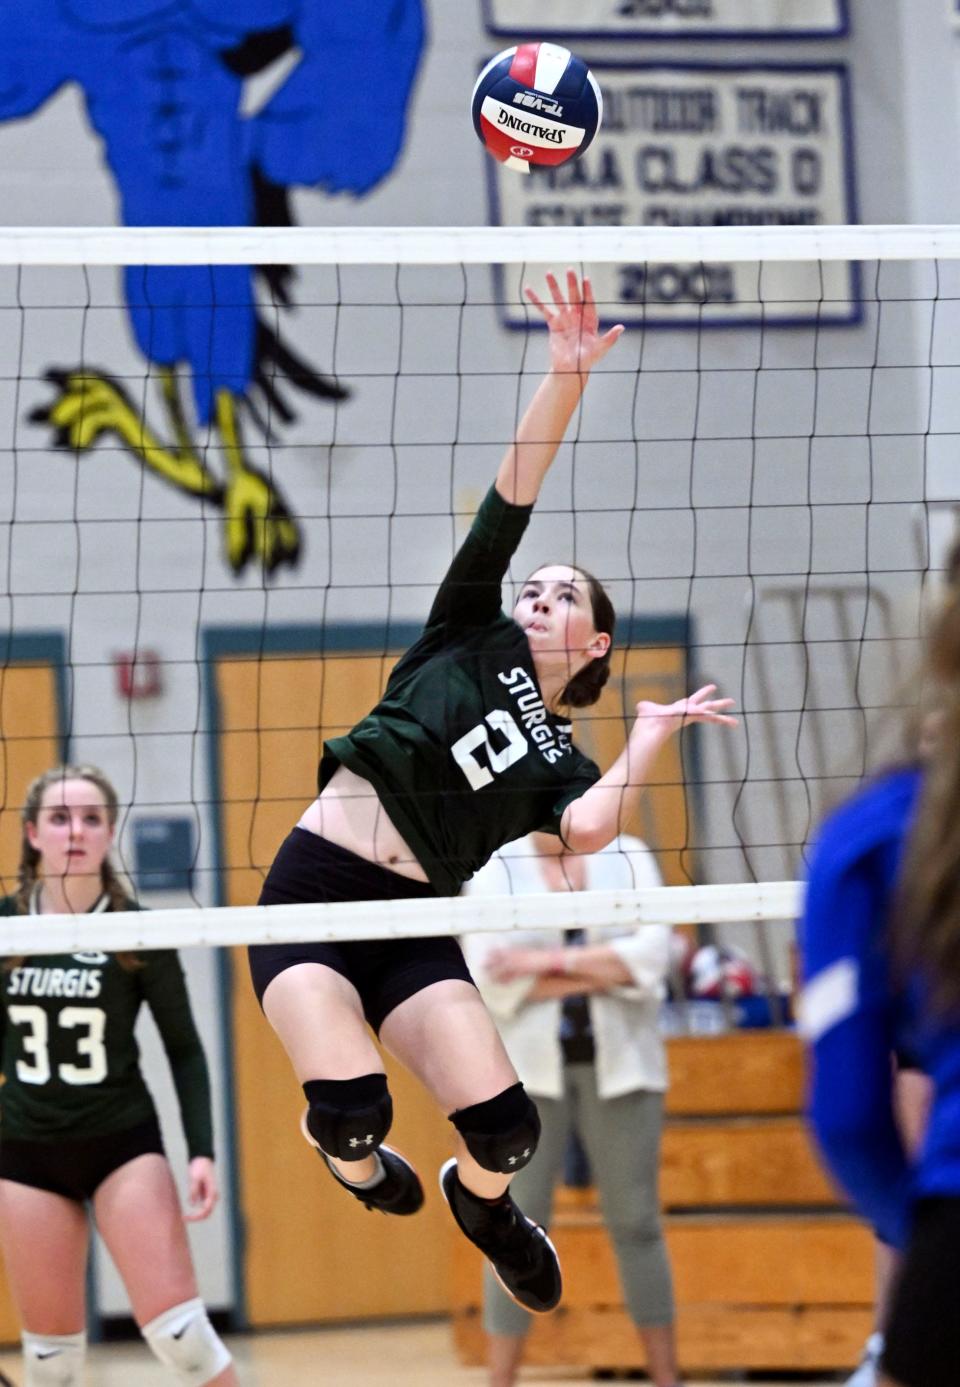 Brodie Gerlach of Sturgis West hits the ball over the net against Mashpee during a Sept. 6, 2022 match.